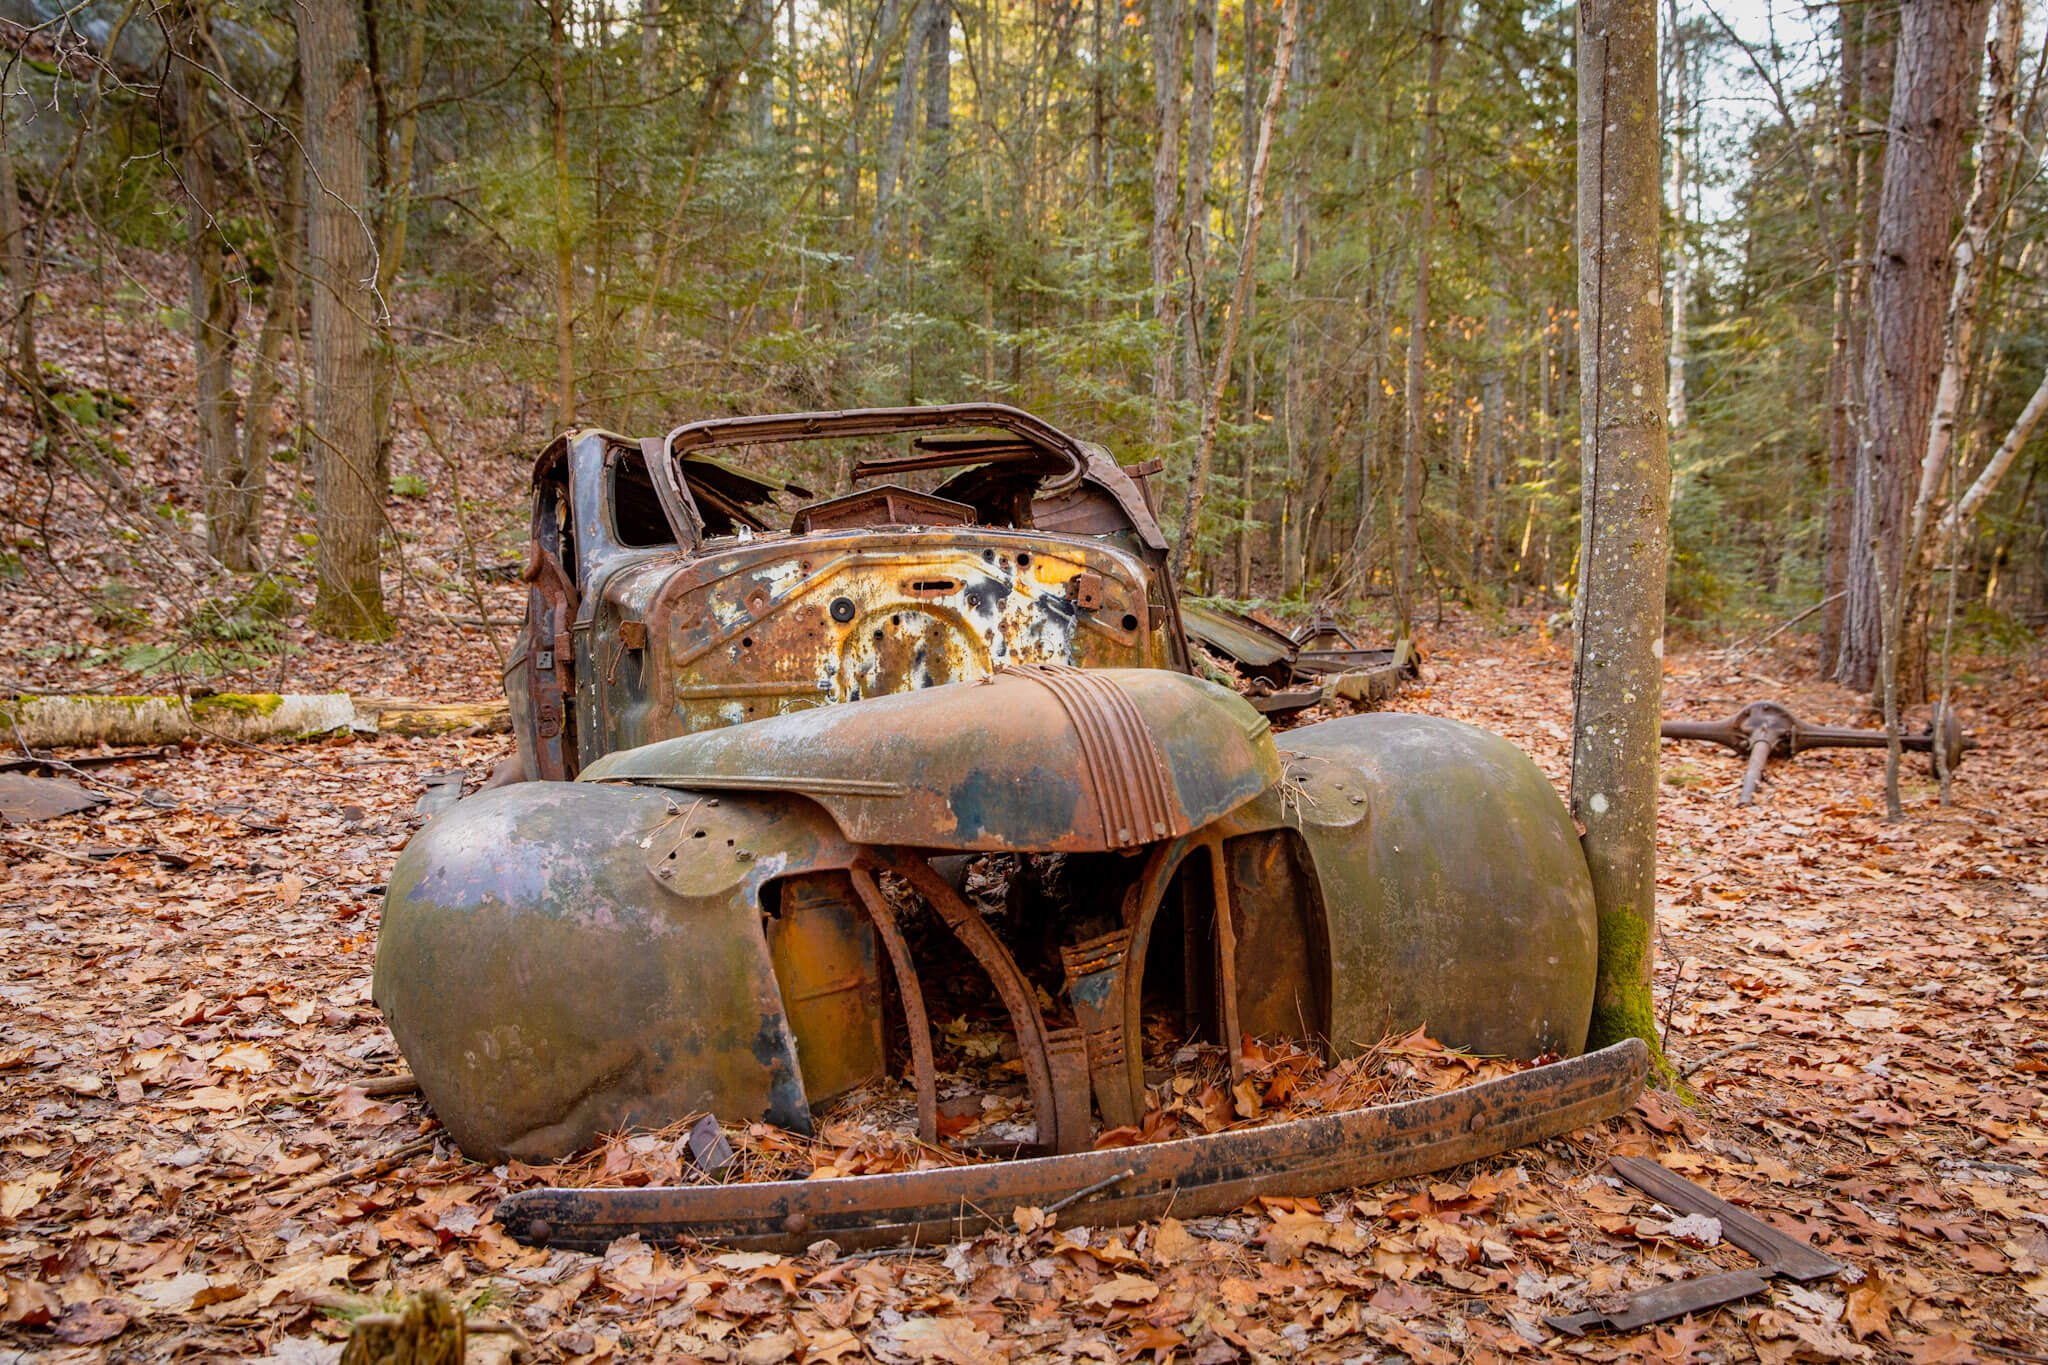 An old car and tractor embedded in the ground along Killarney’s Granite Ridge Trail is a reminder of the farm that once occupied this land